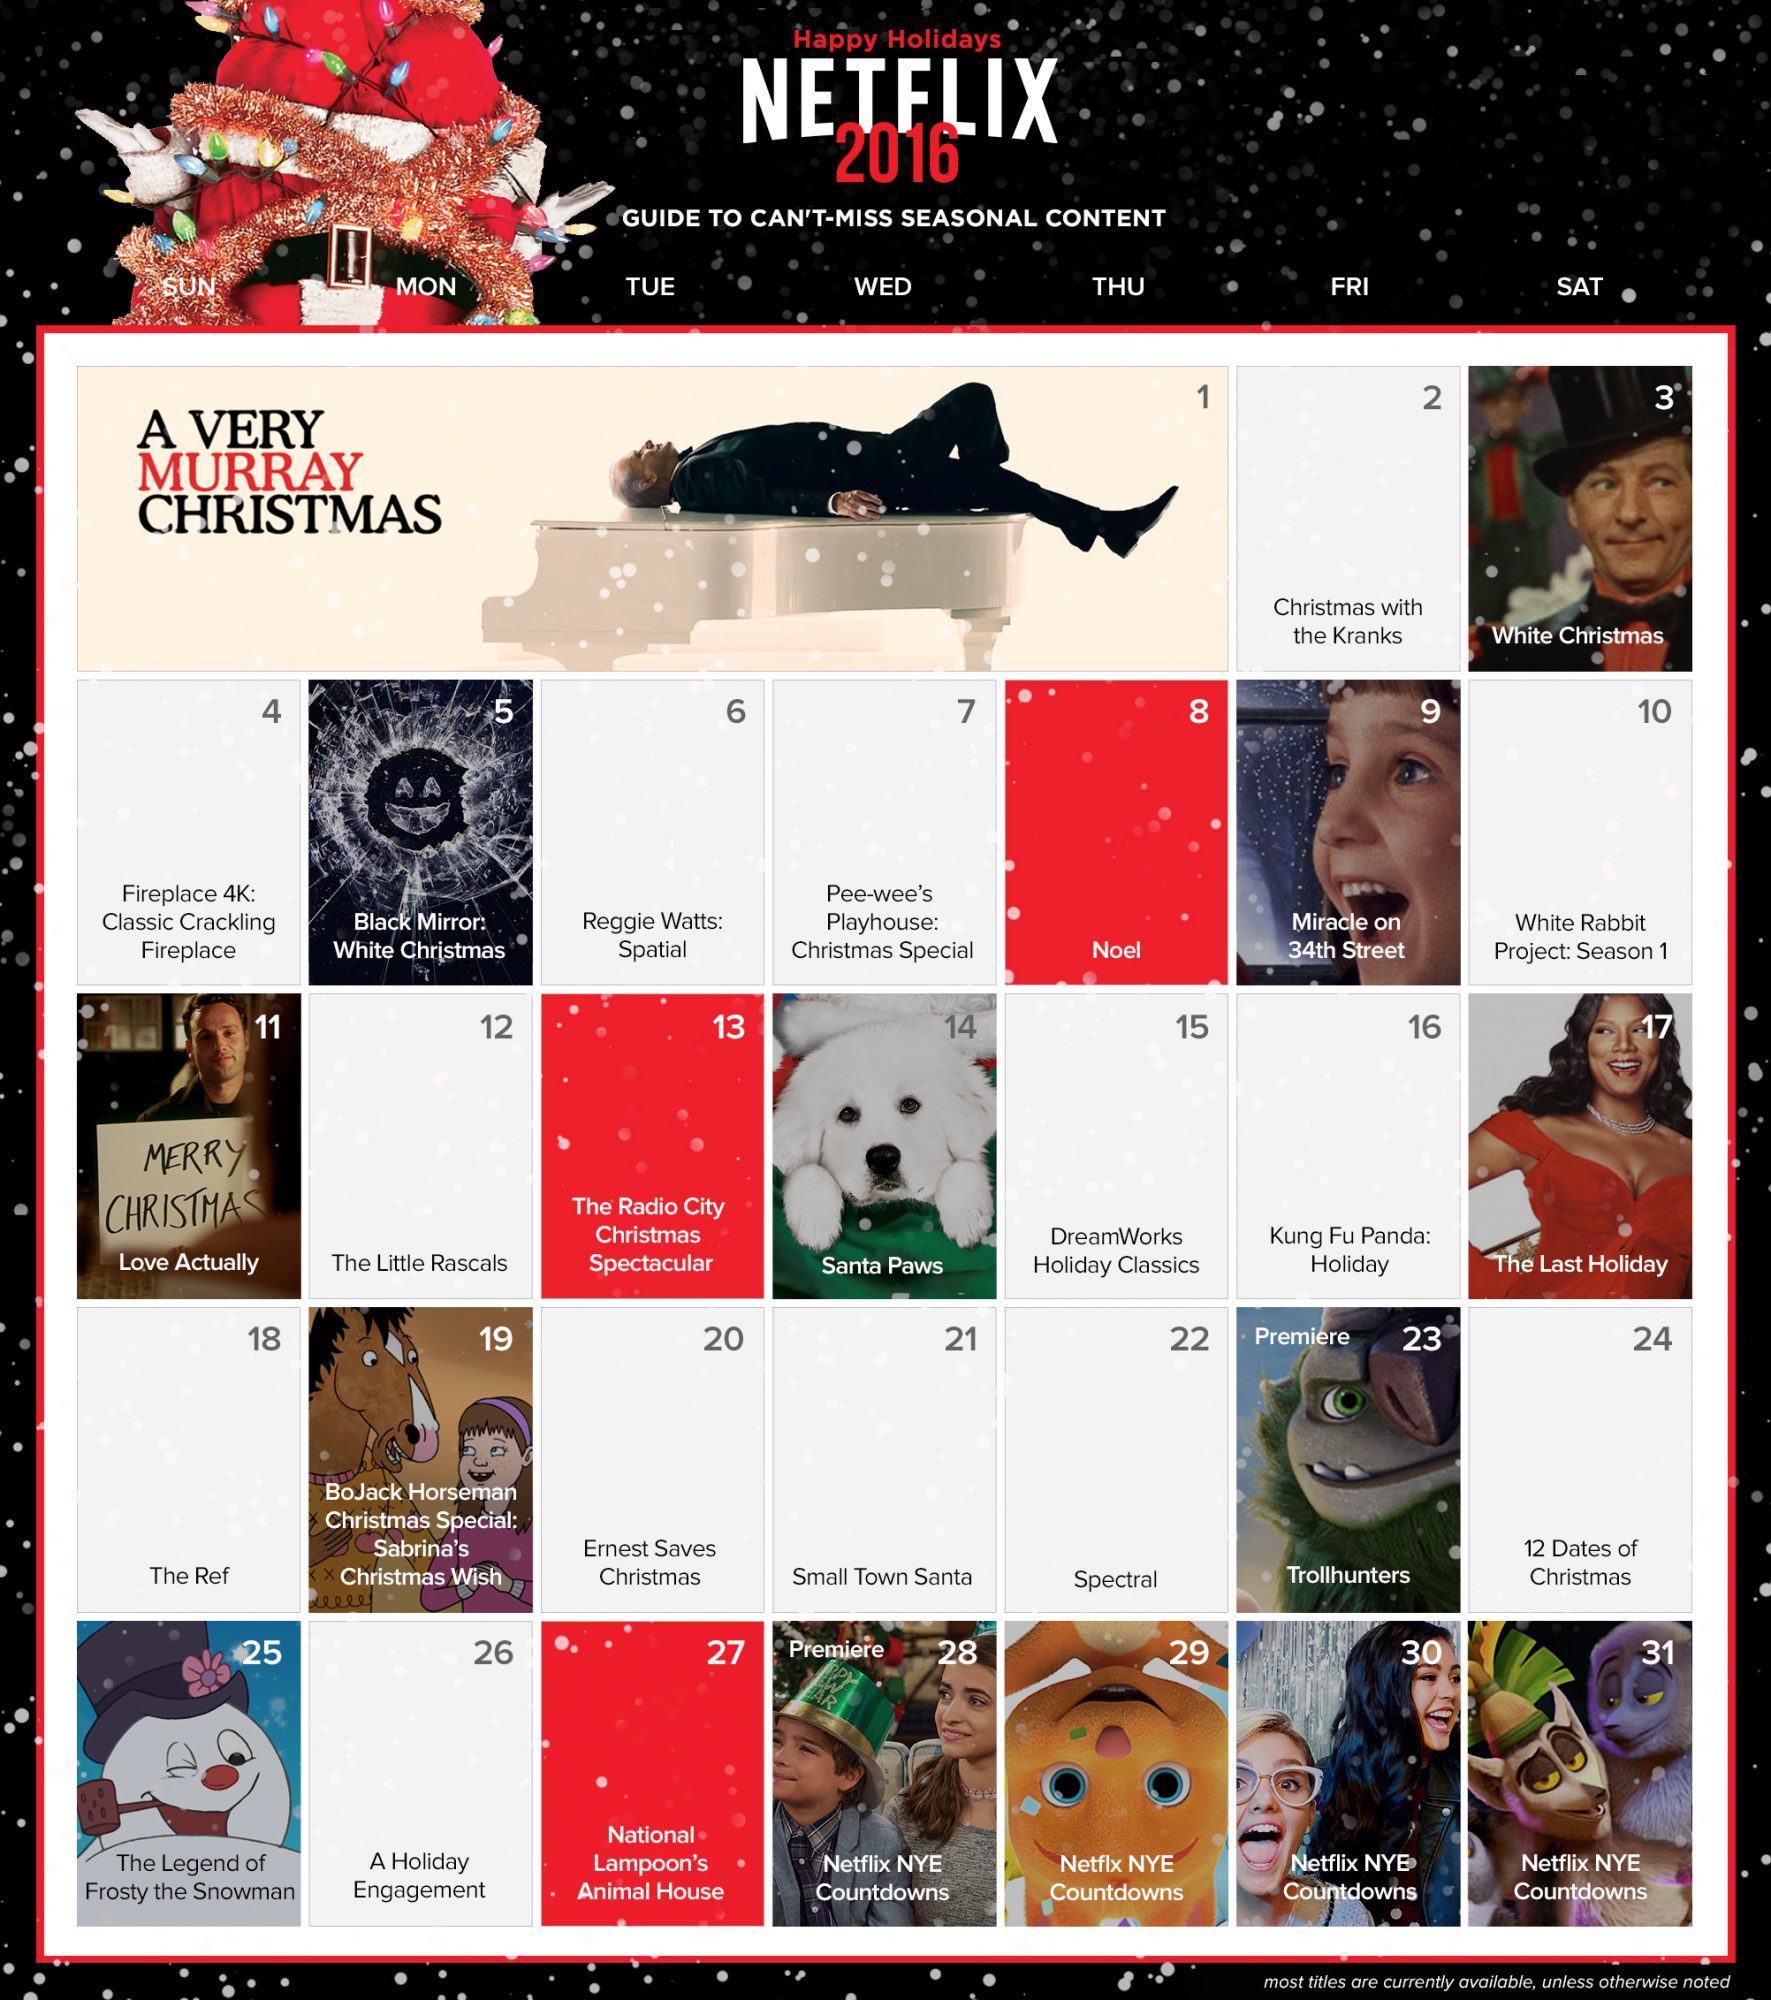 Netflix has created the *perfect* holiday calendar to plan out our